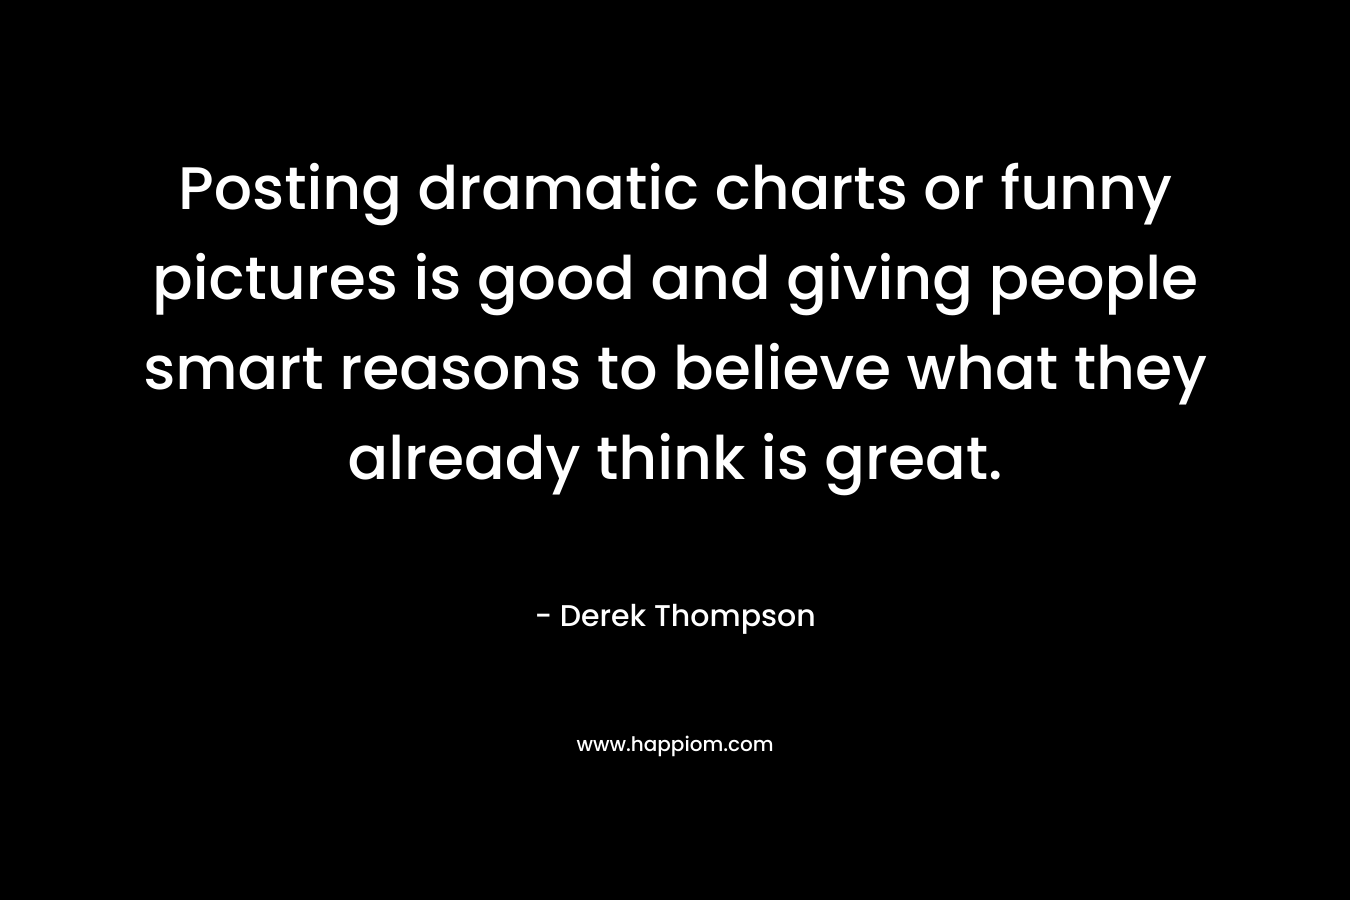 Posting dramatic charts or funny pictures is good and giving people smart reasons to believe what they already think is great. – Derek Thompson